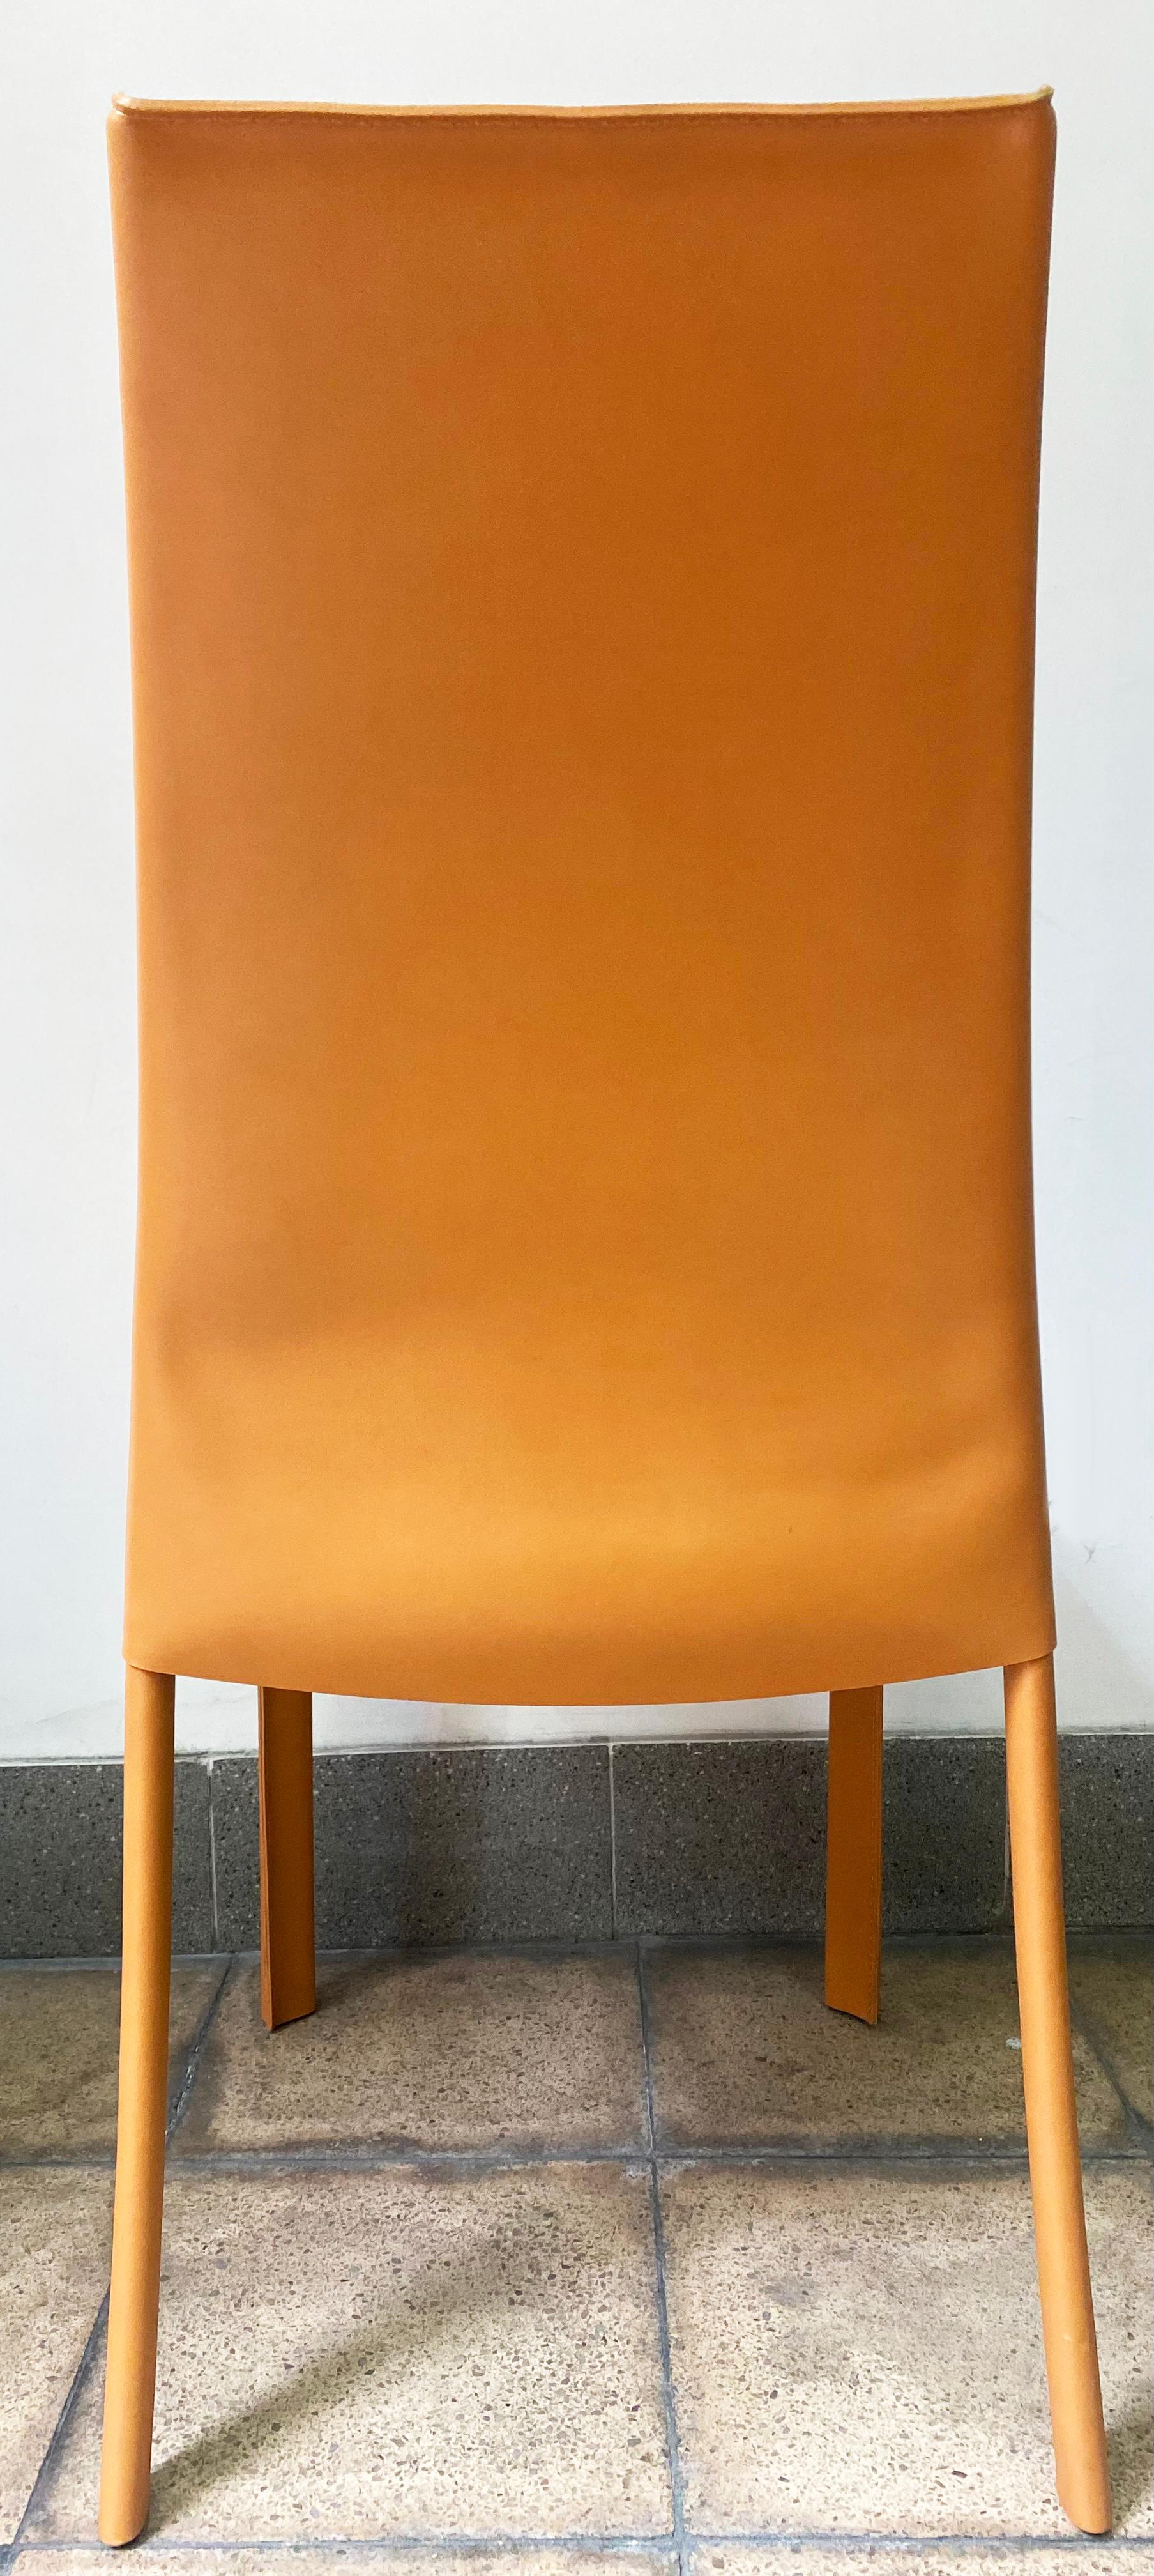 Poltrona Frau, Pair of Frag Chairs Fawn Leather For Sale 4